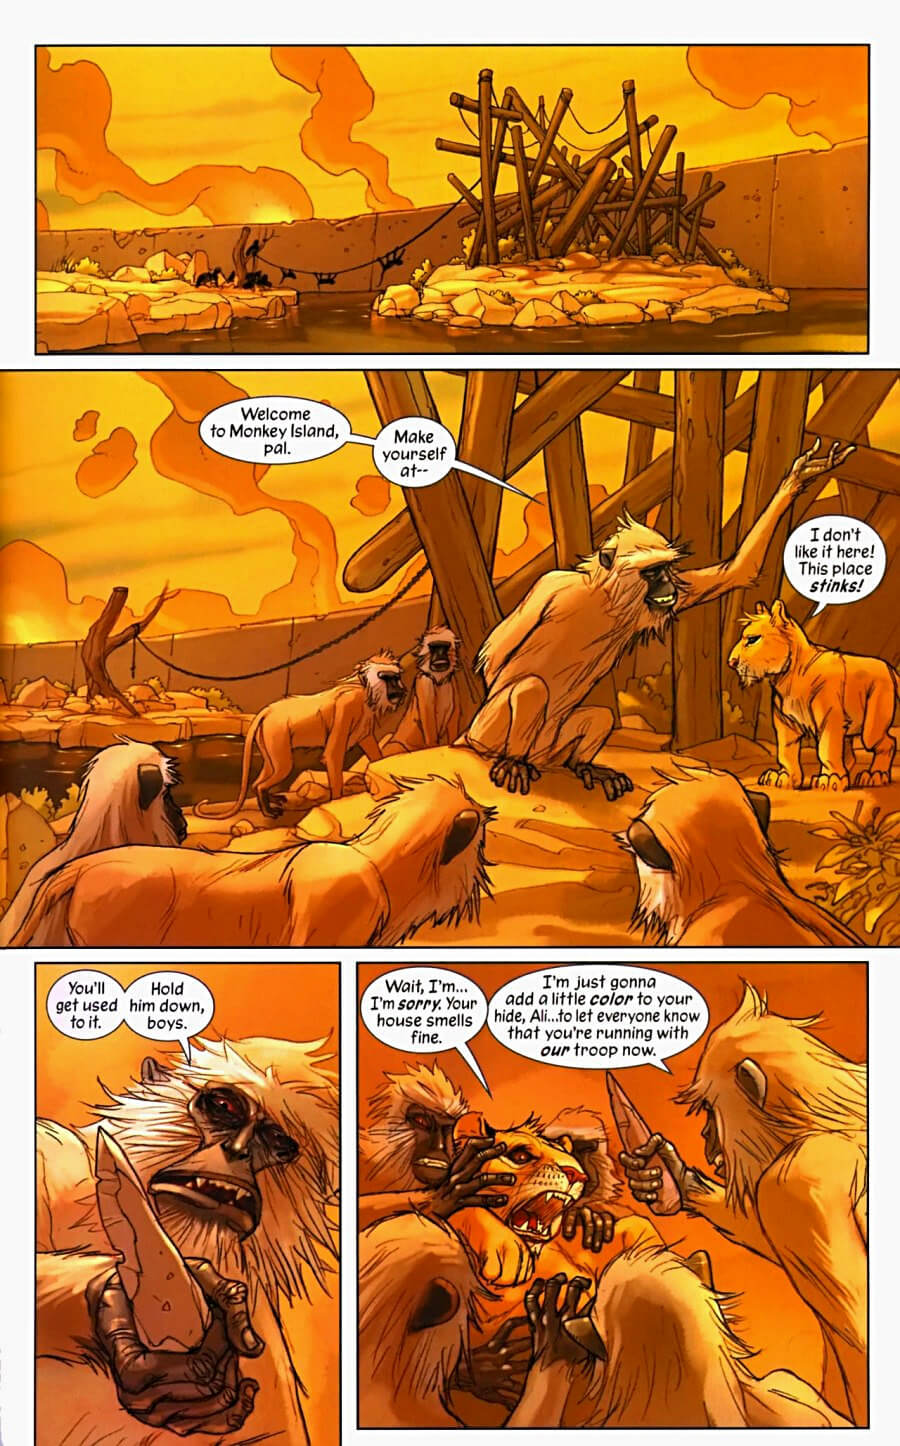 page 32 of pride of baghdad graphic novel